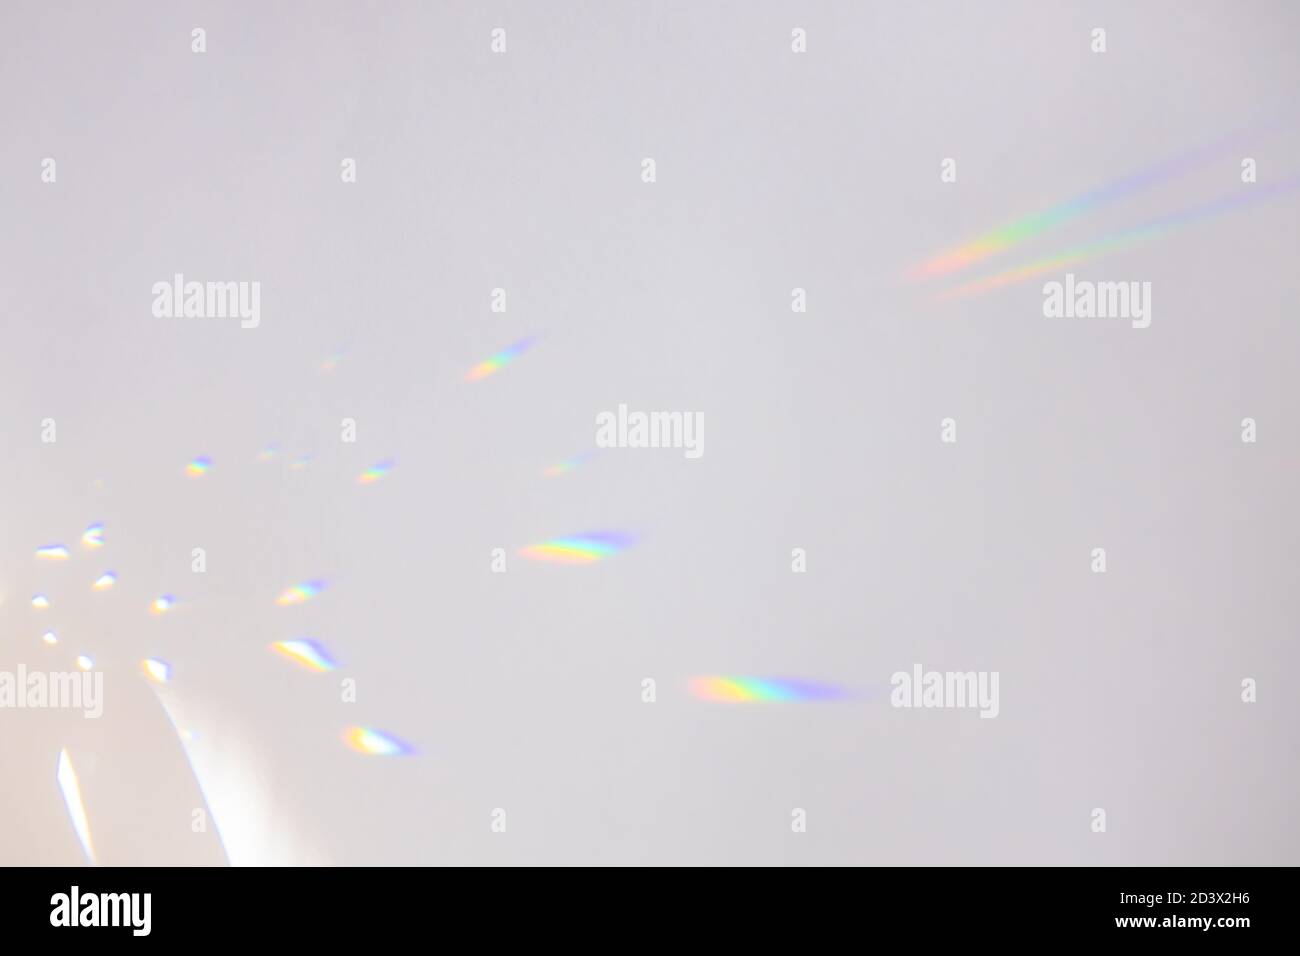 Bright iridescent highlights on a neutral gray background. Stock Photo